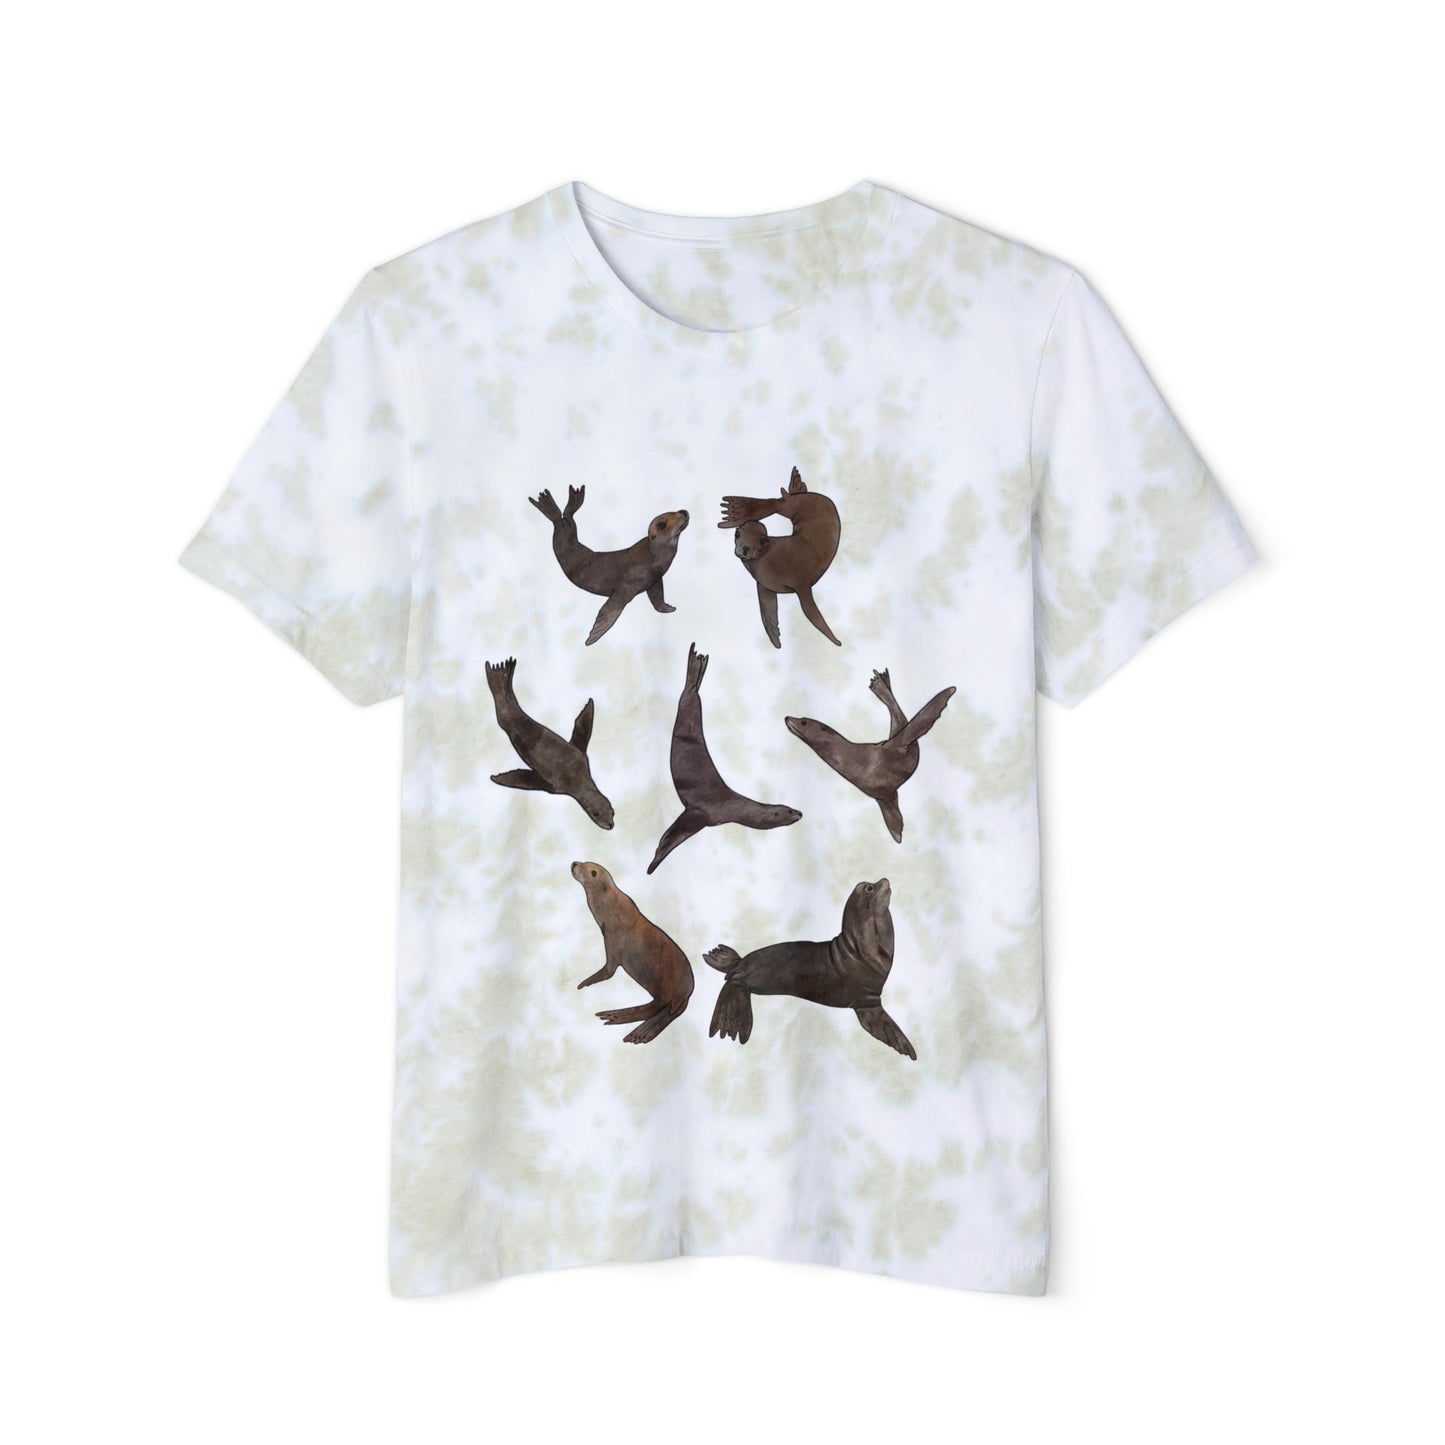 Sea Lion Tie-Dyed T-Shirt